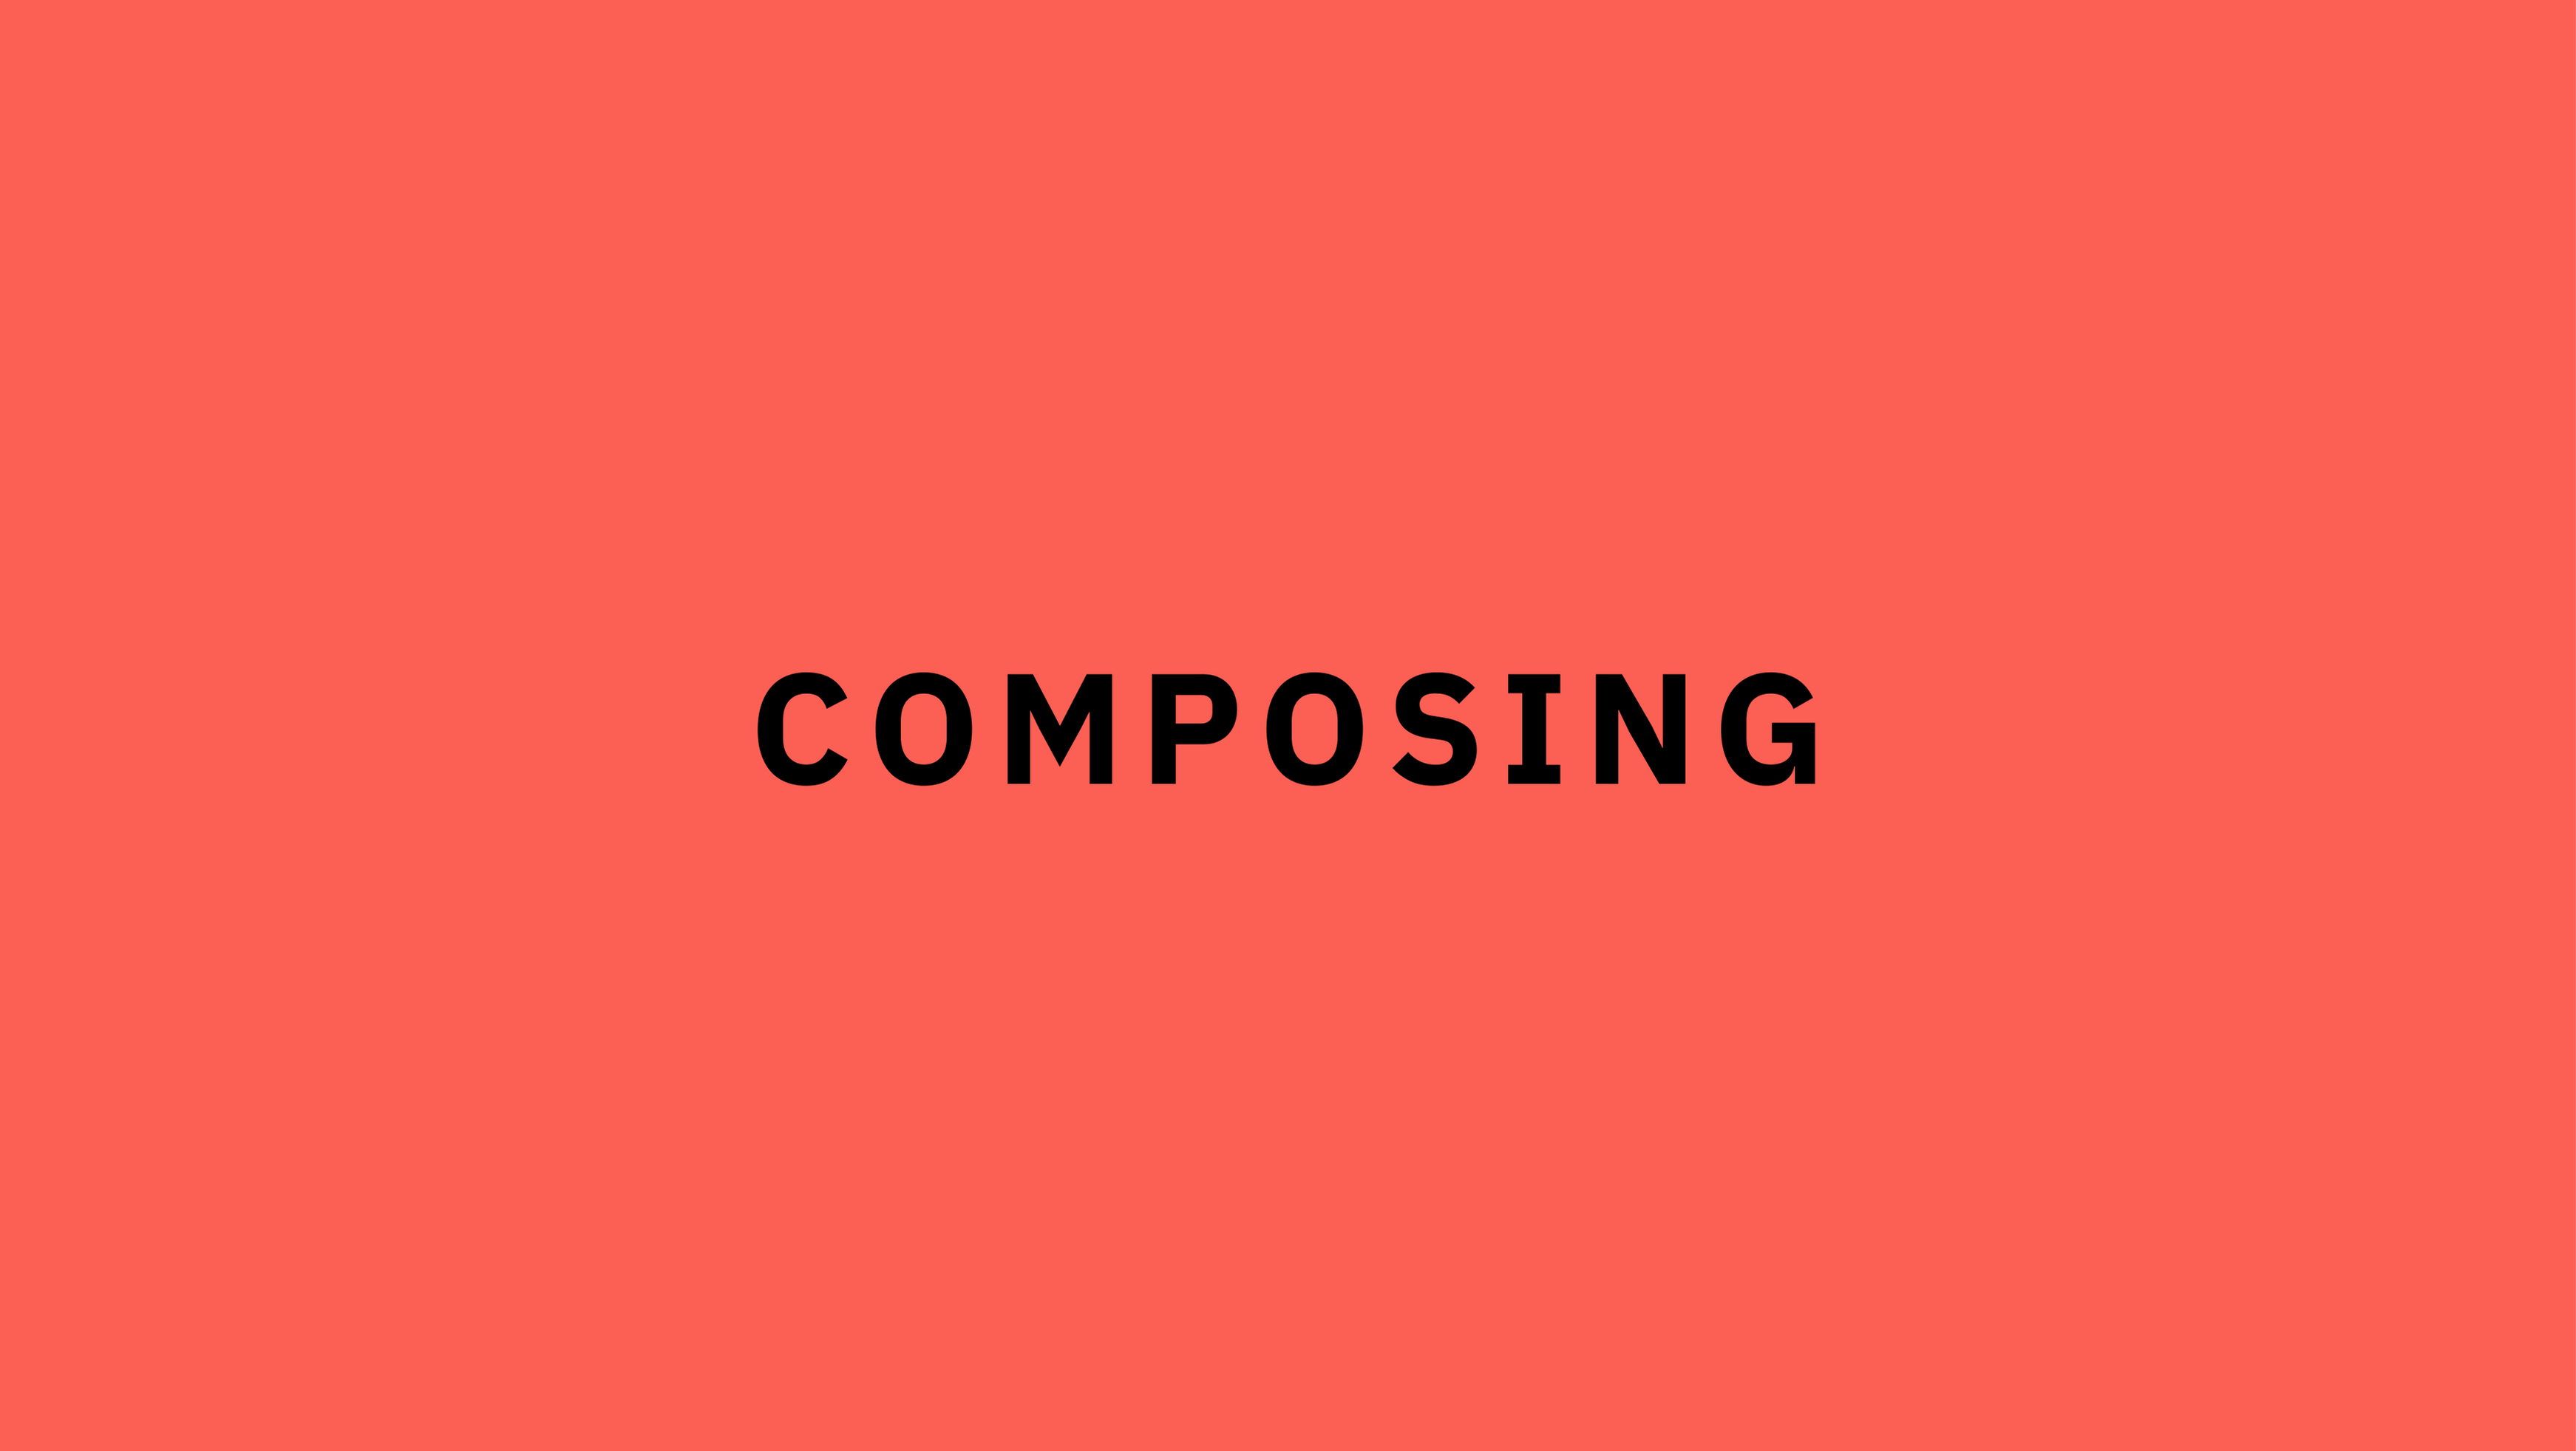 Section 3: Composing